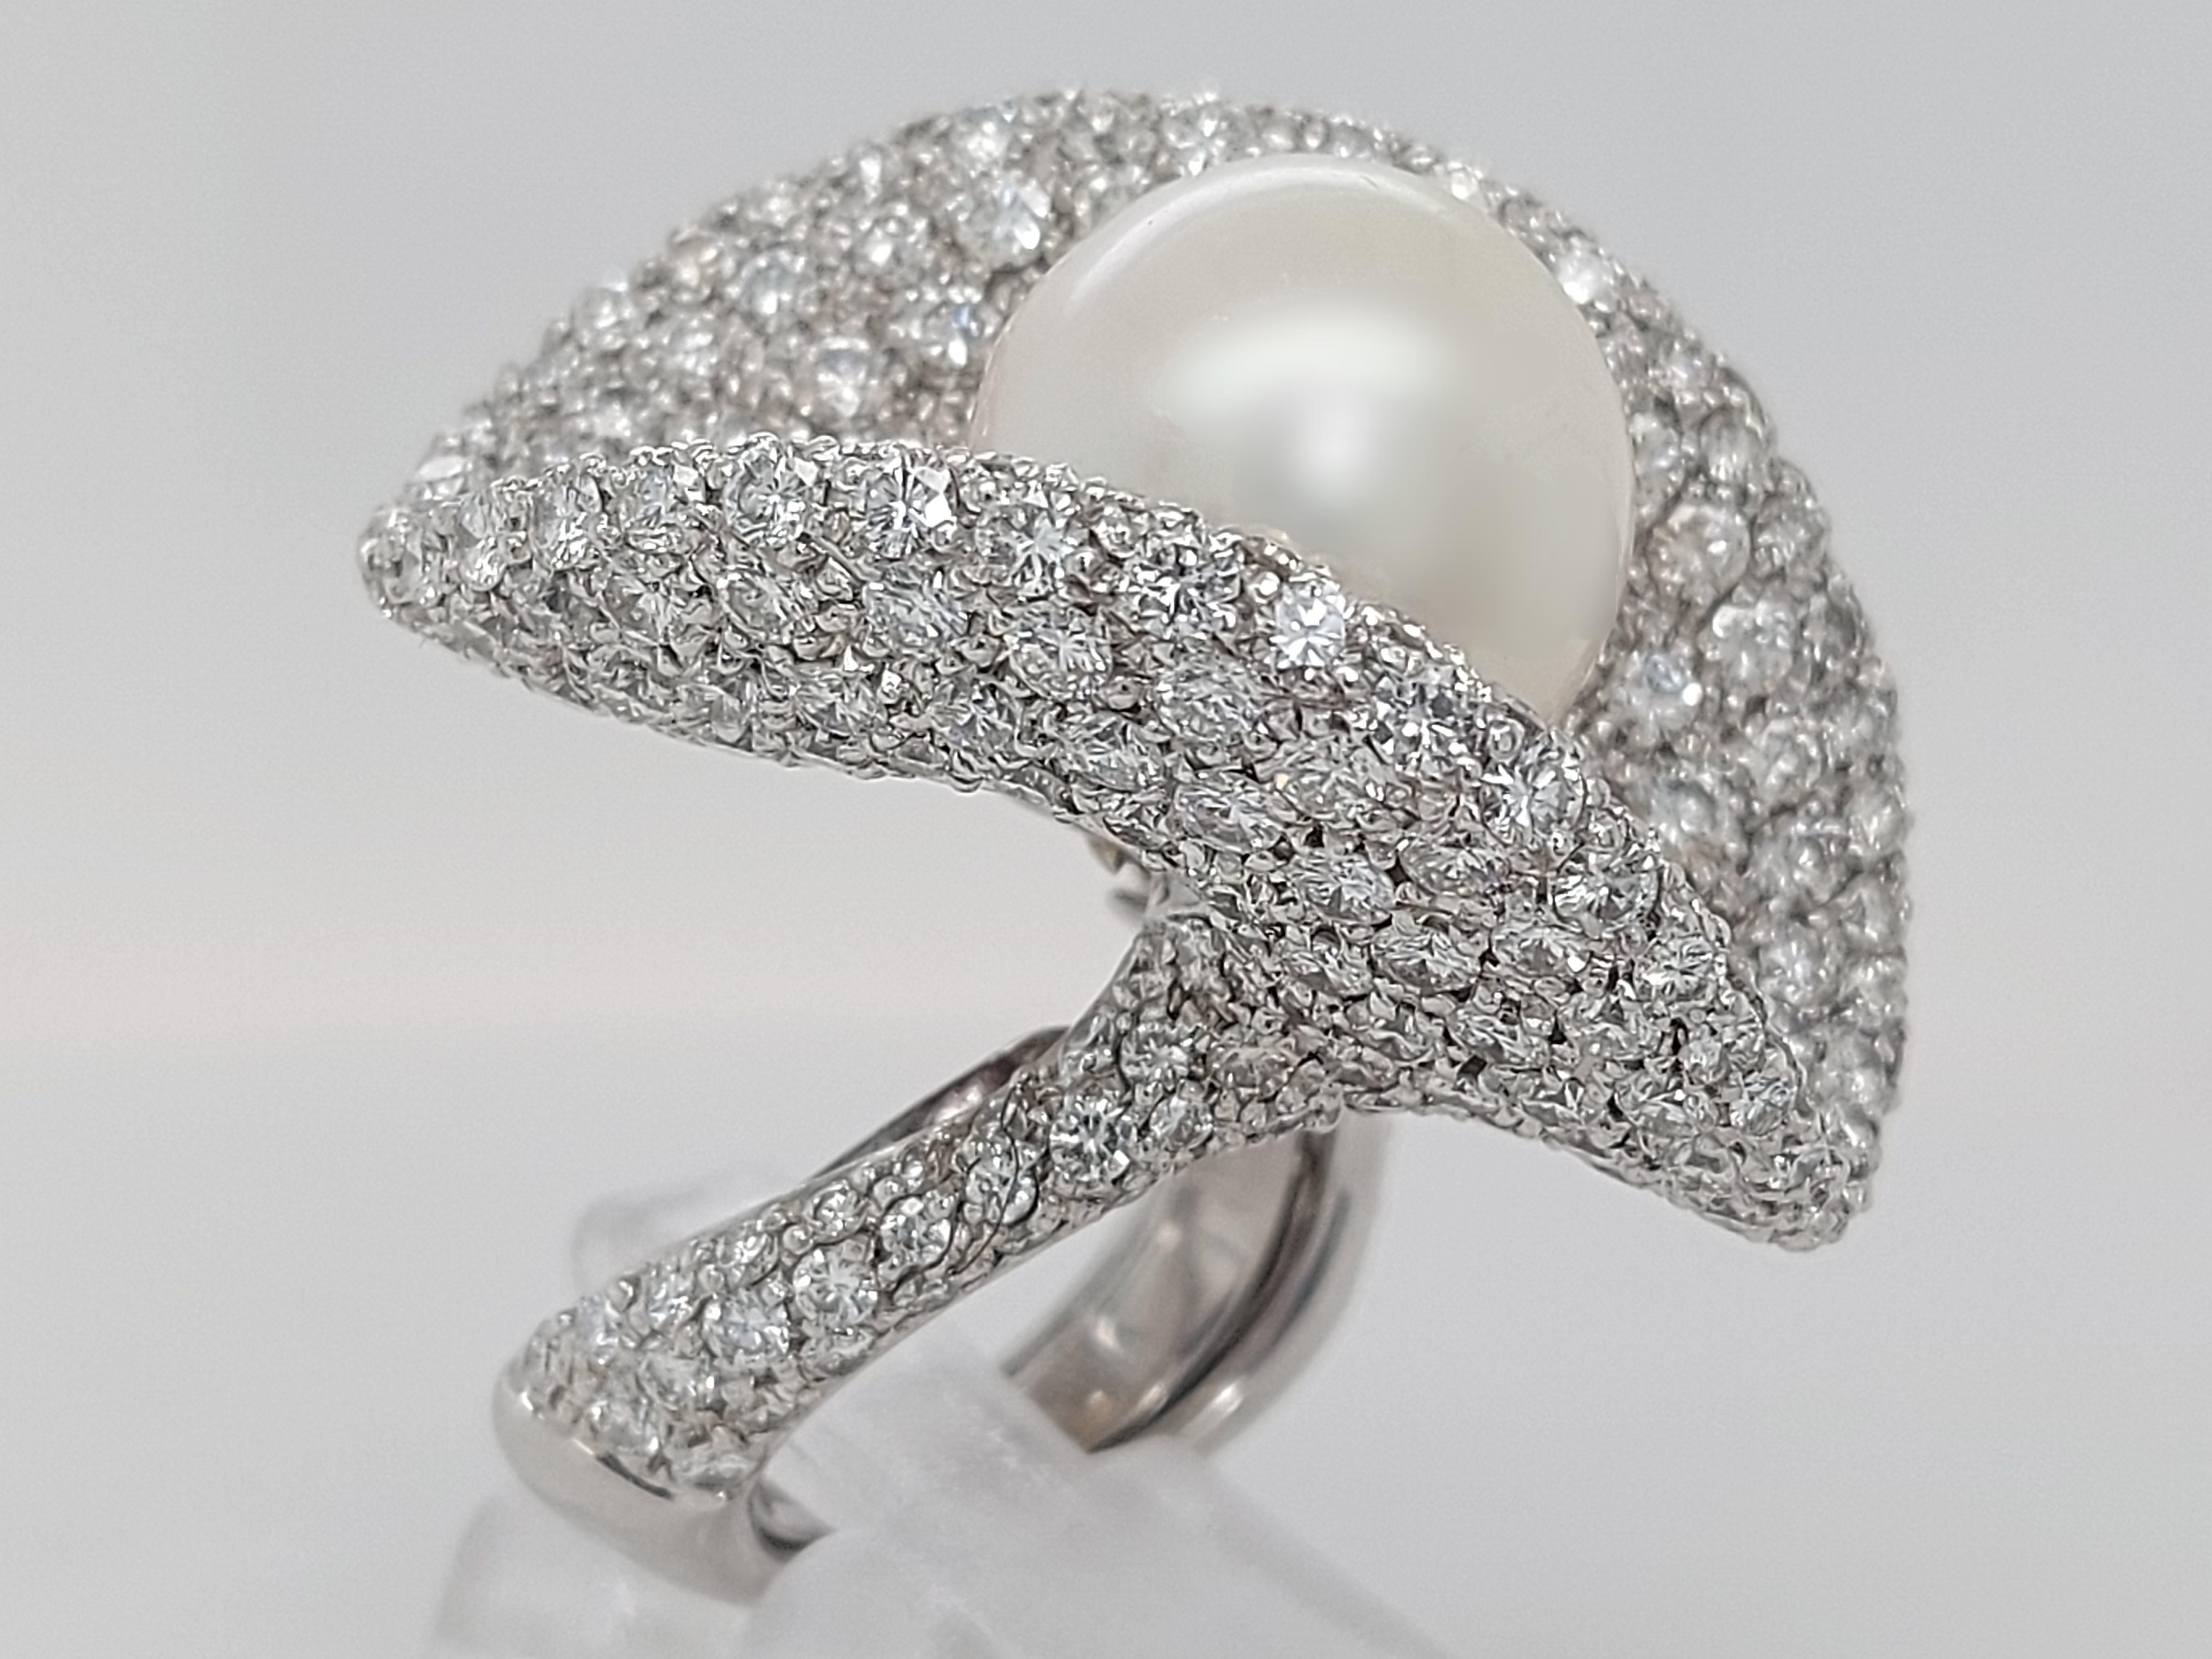 Contemporary Magnificent 18 Karat White Gold Ring with 14.5 Carat Diamonds and a Big Pearl For Sale